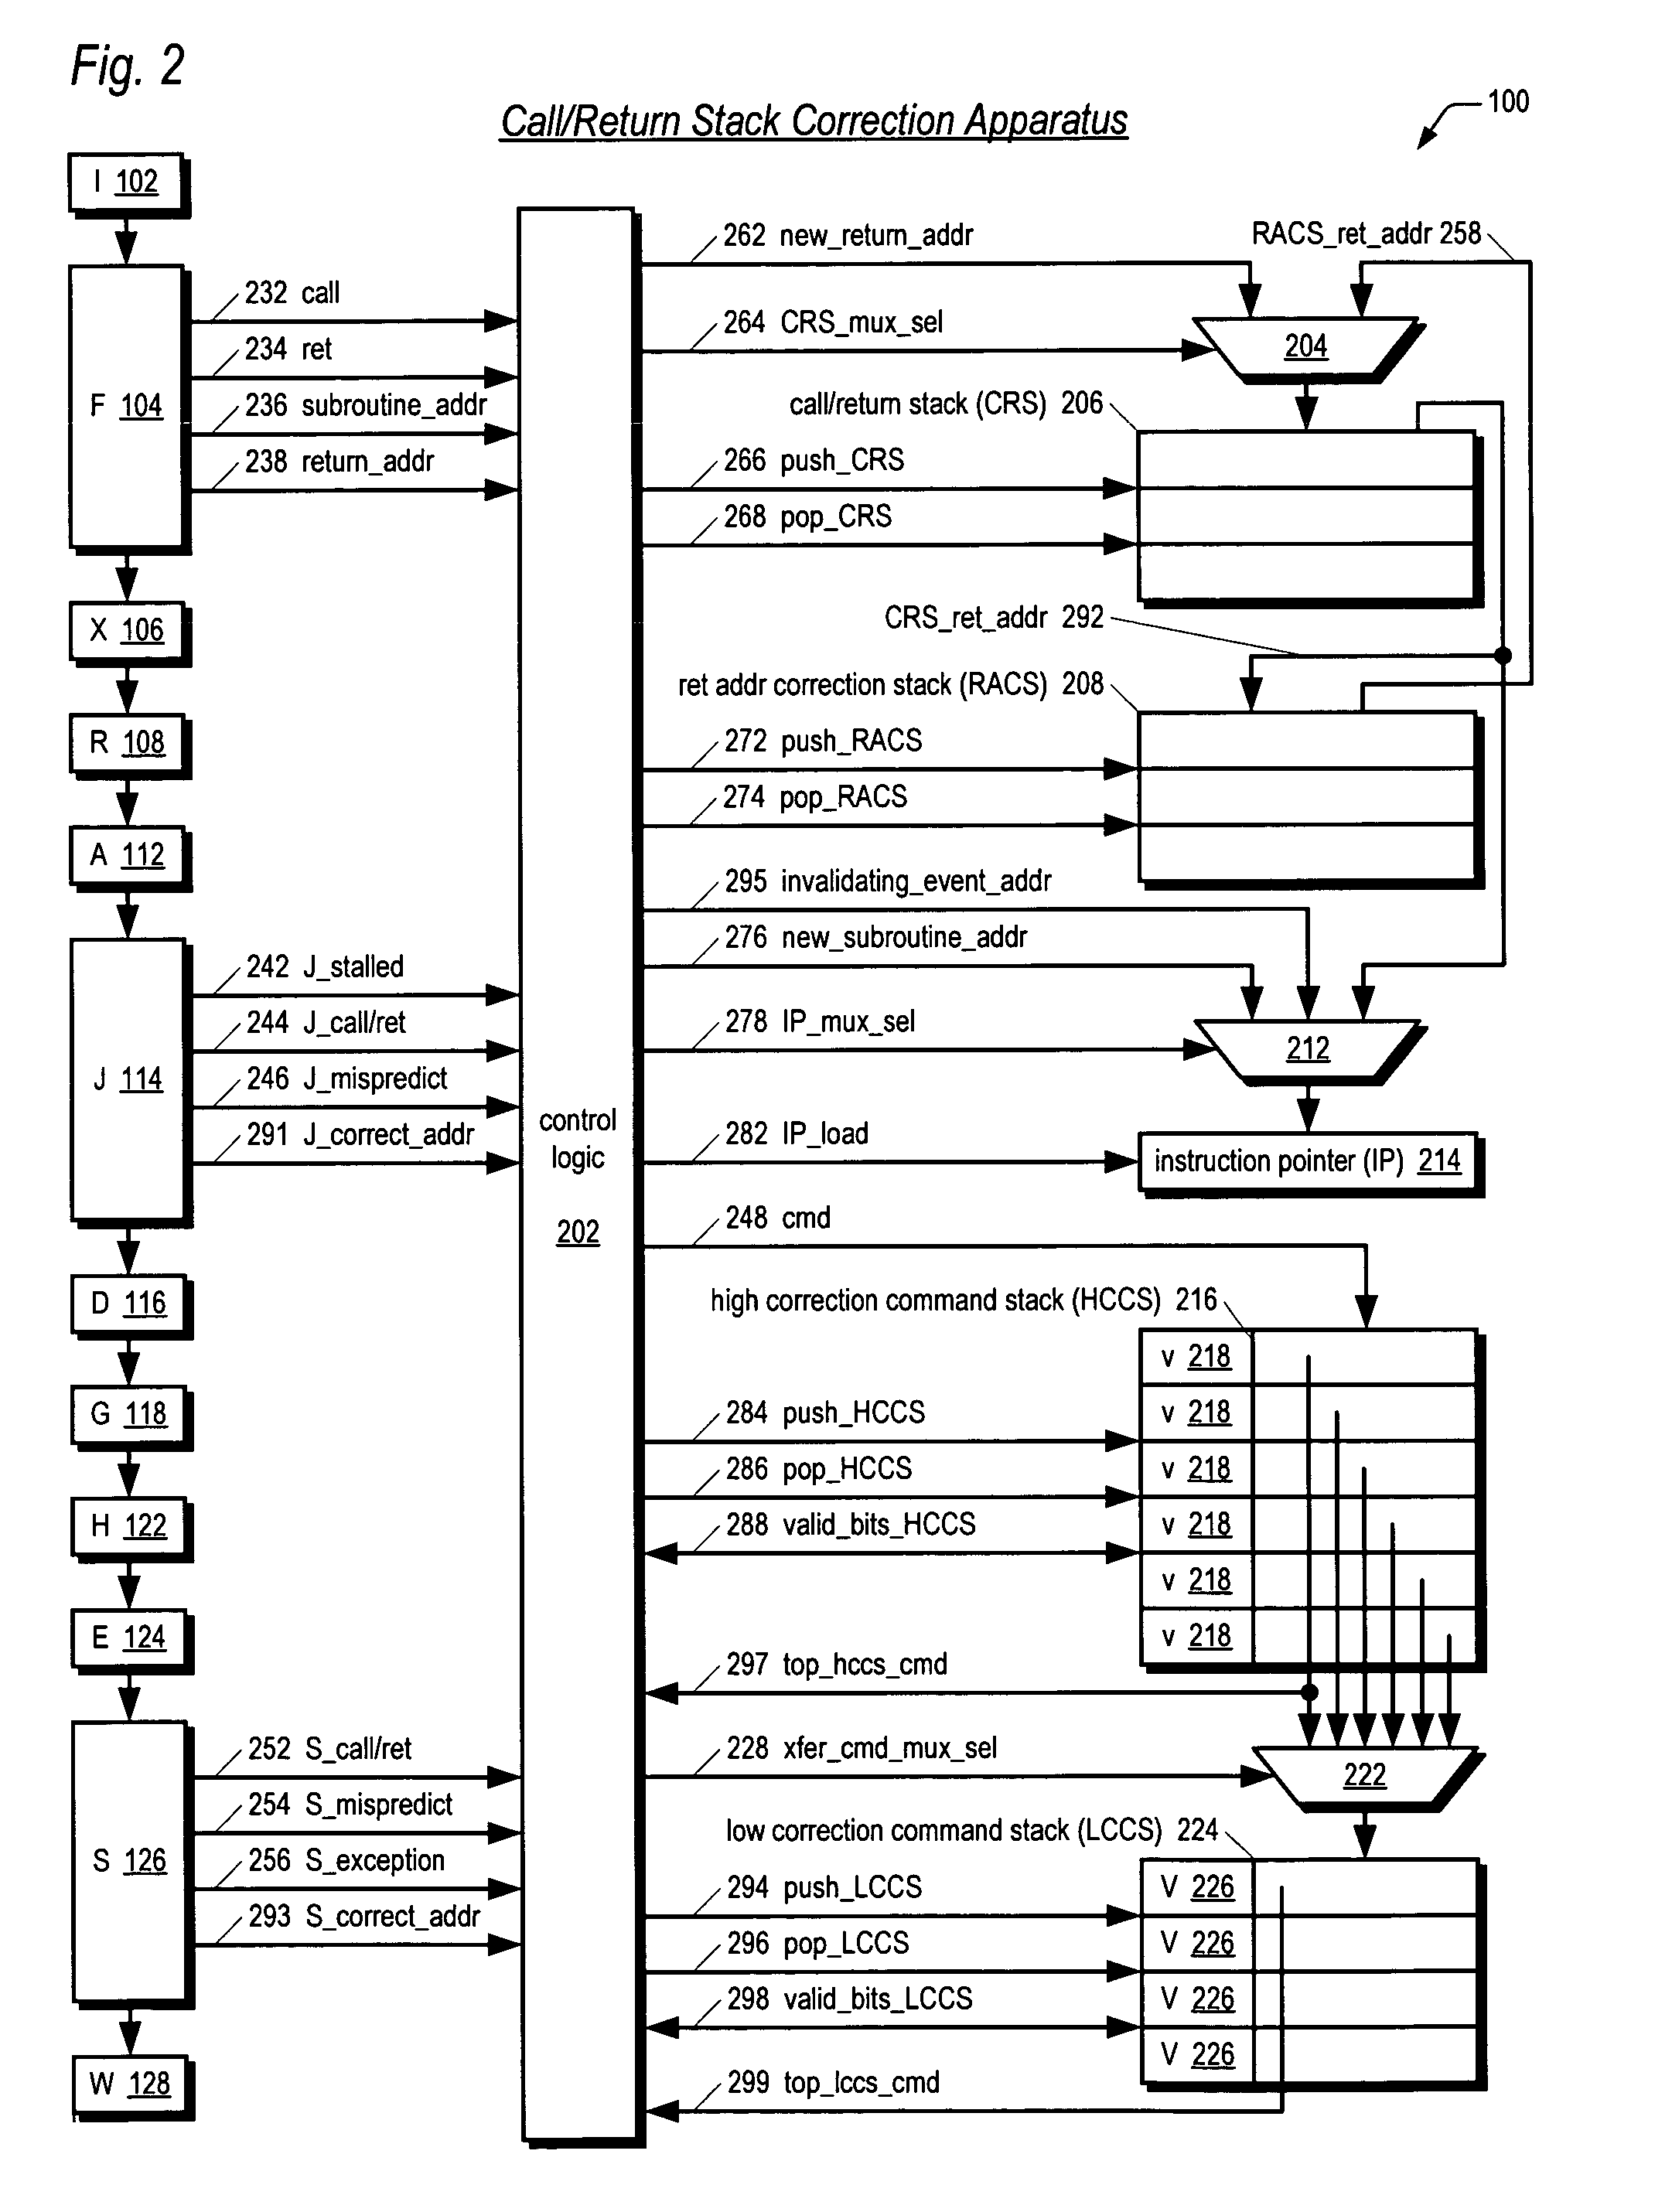 Method and apparatus for correcting an internal call/return stack in a microprocessor that detects from multiple pipeline stages incorrect speculative update of the call/return stack